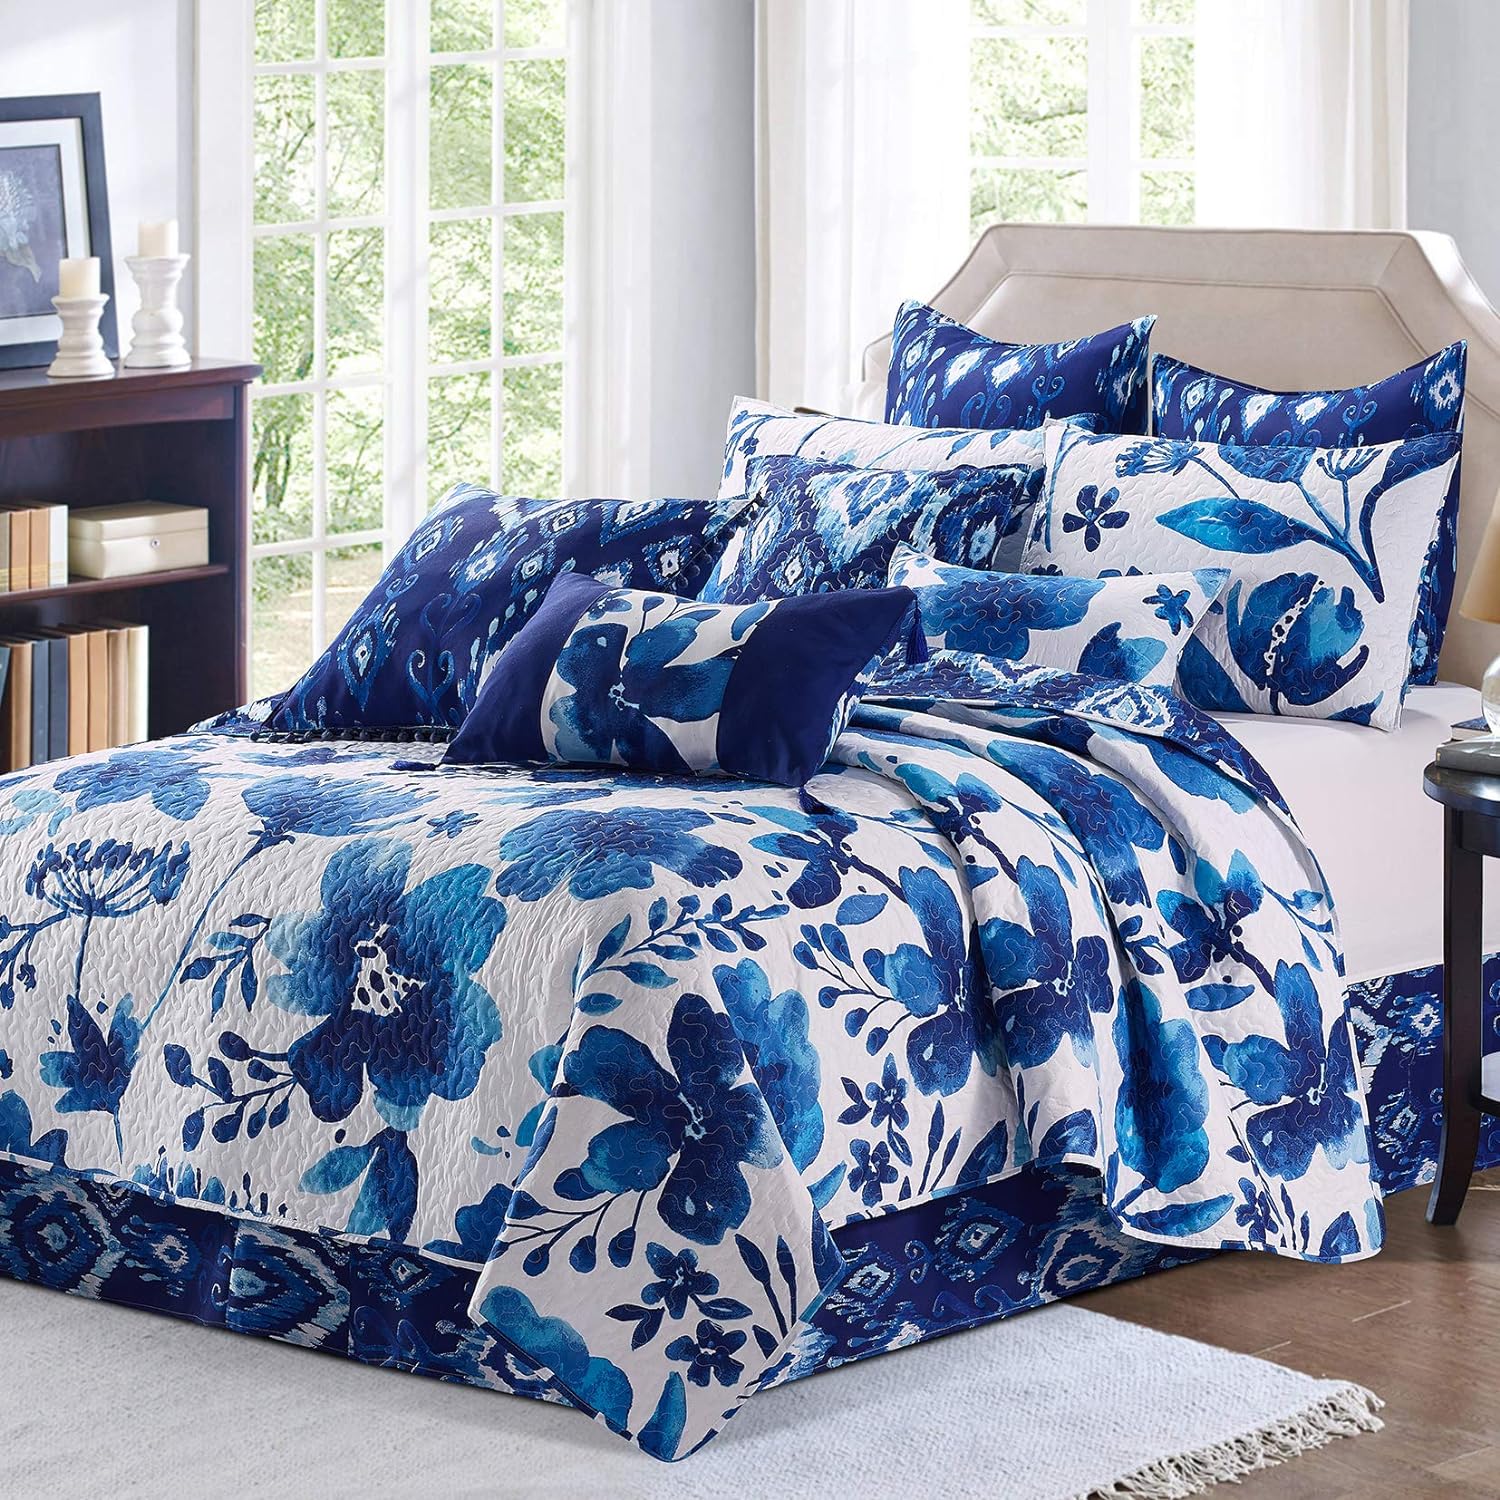 Virah Bella Quilt Bedding Set in King Indigo Botanical Printed Lightweight Reversible Quilt with 2 Matching Pillow Shams - Cozy & Beautiful Contemporary-Themed Bedding